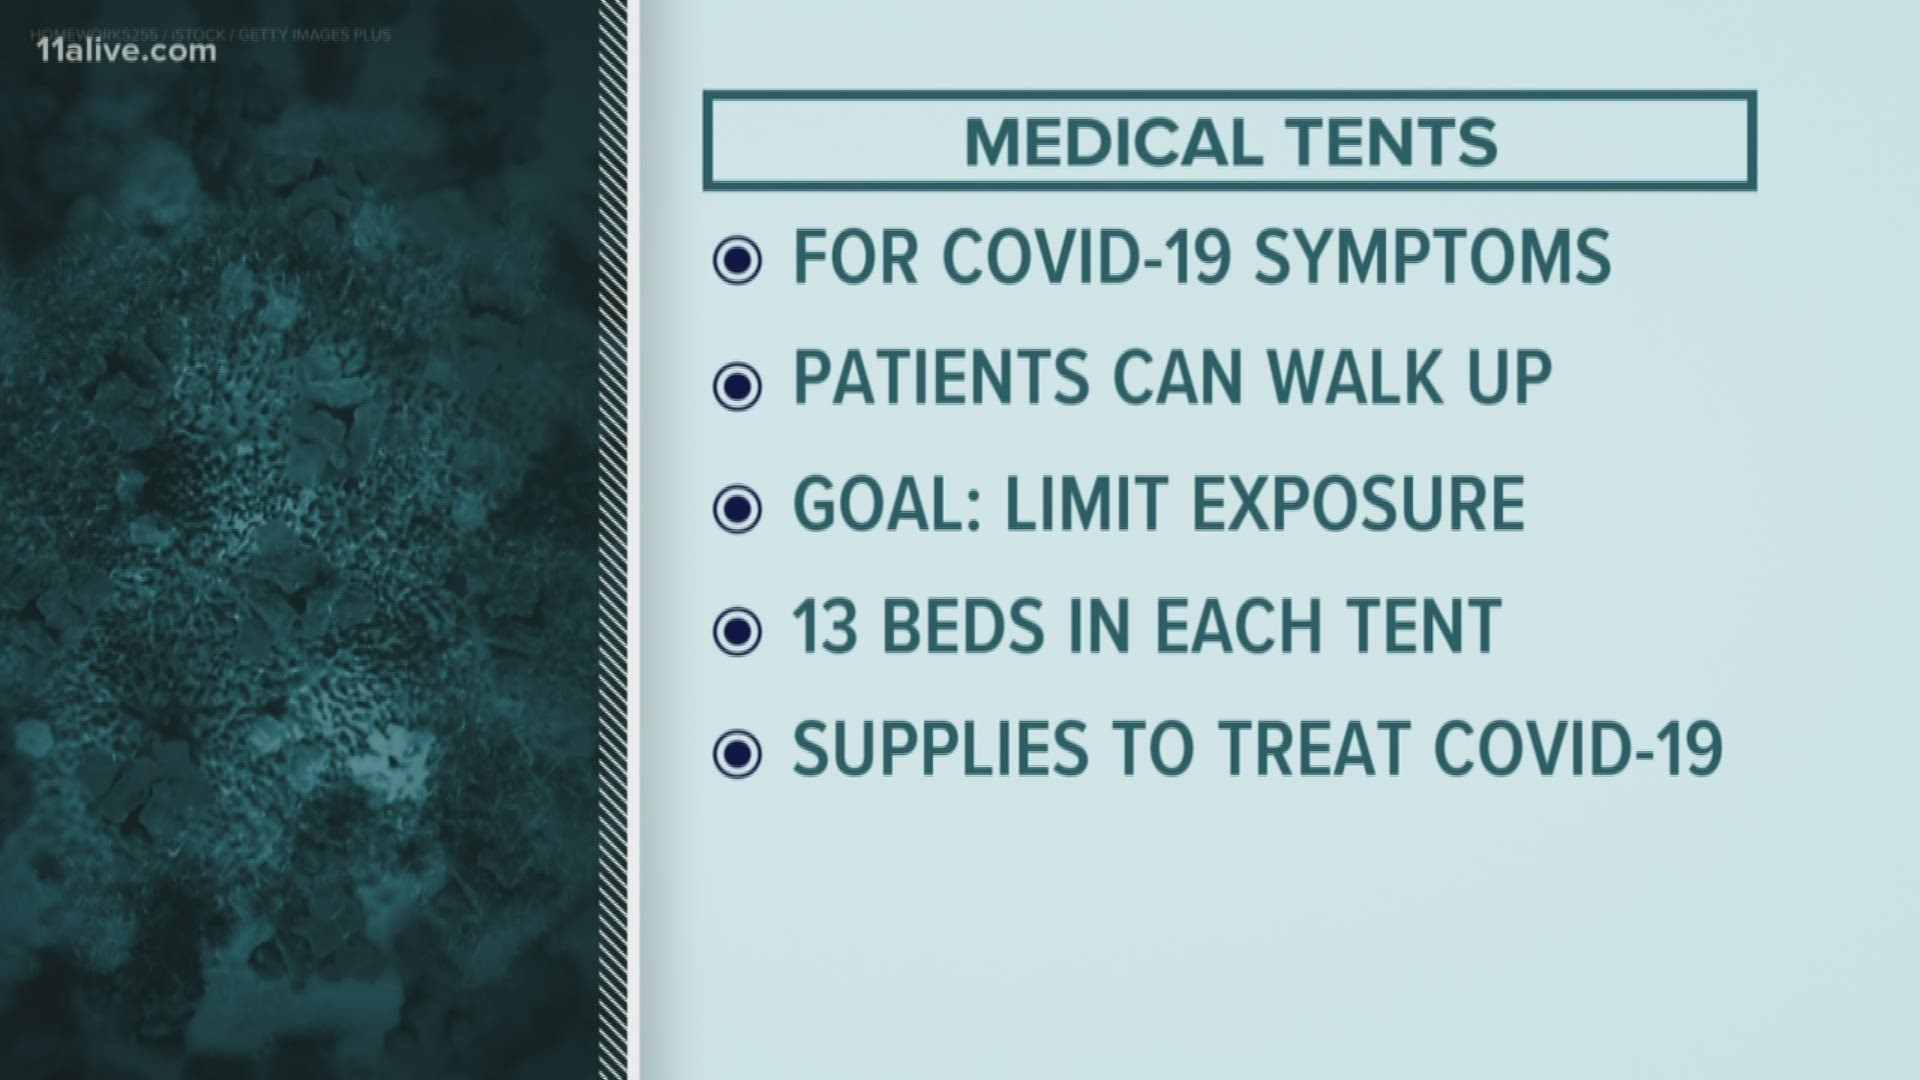 The tents will be on the Gainesville and Braselton campuses for anyone with COVID-19 symptoms